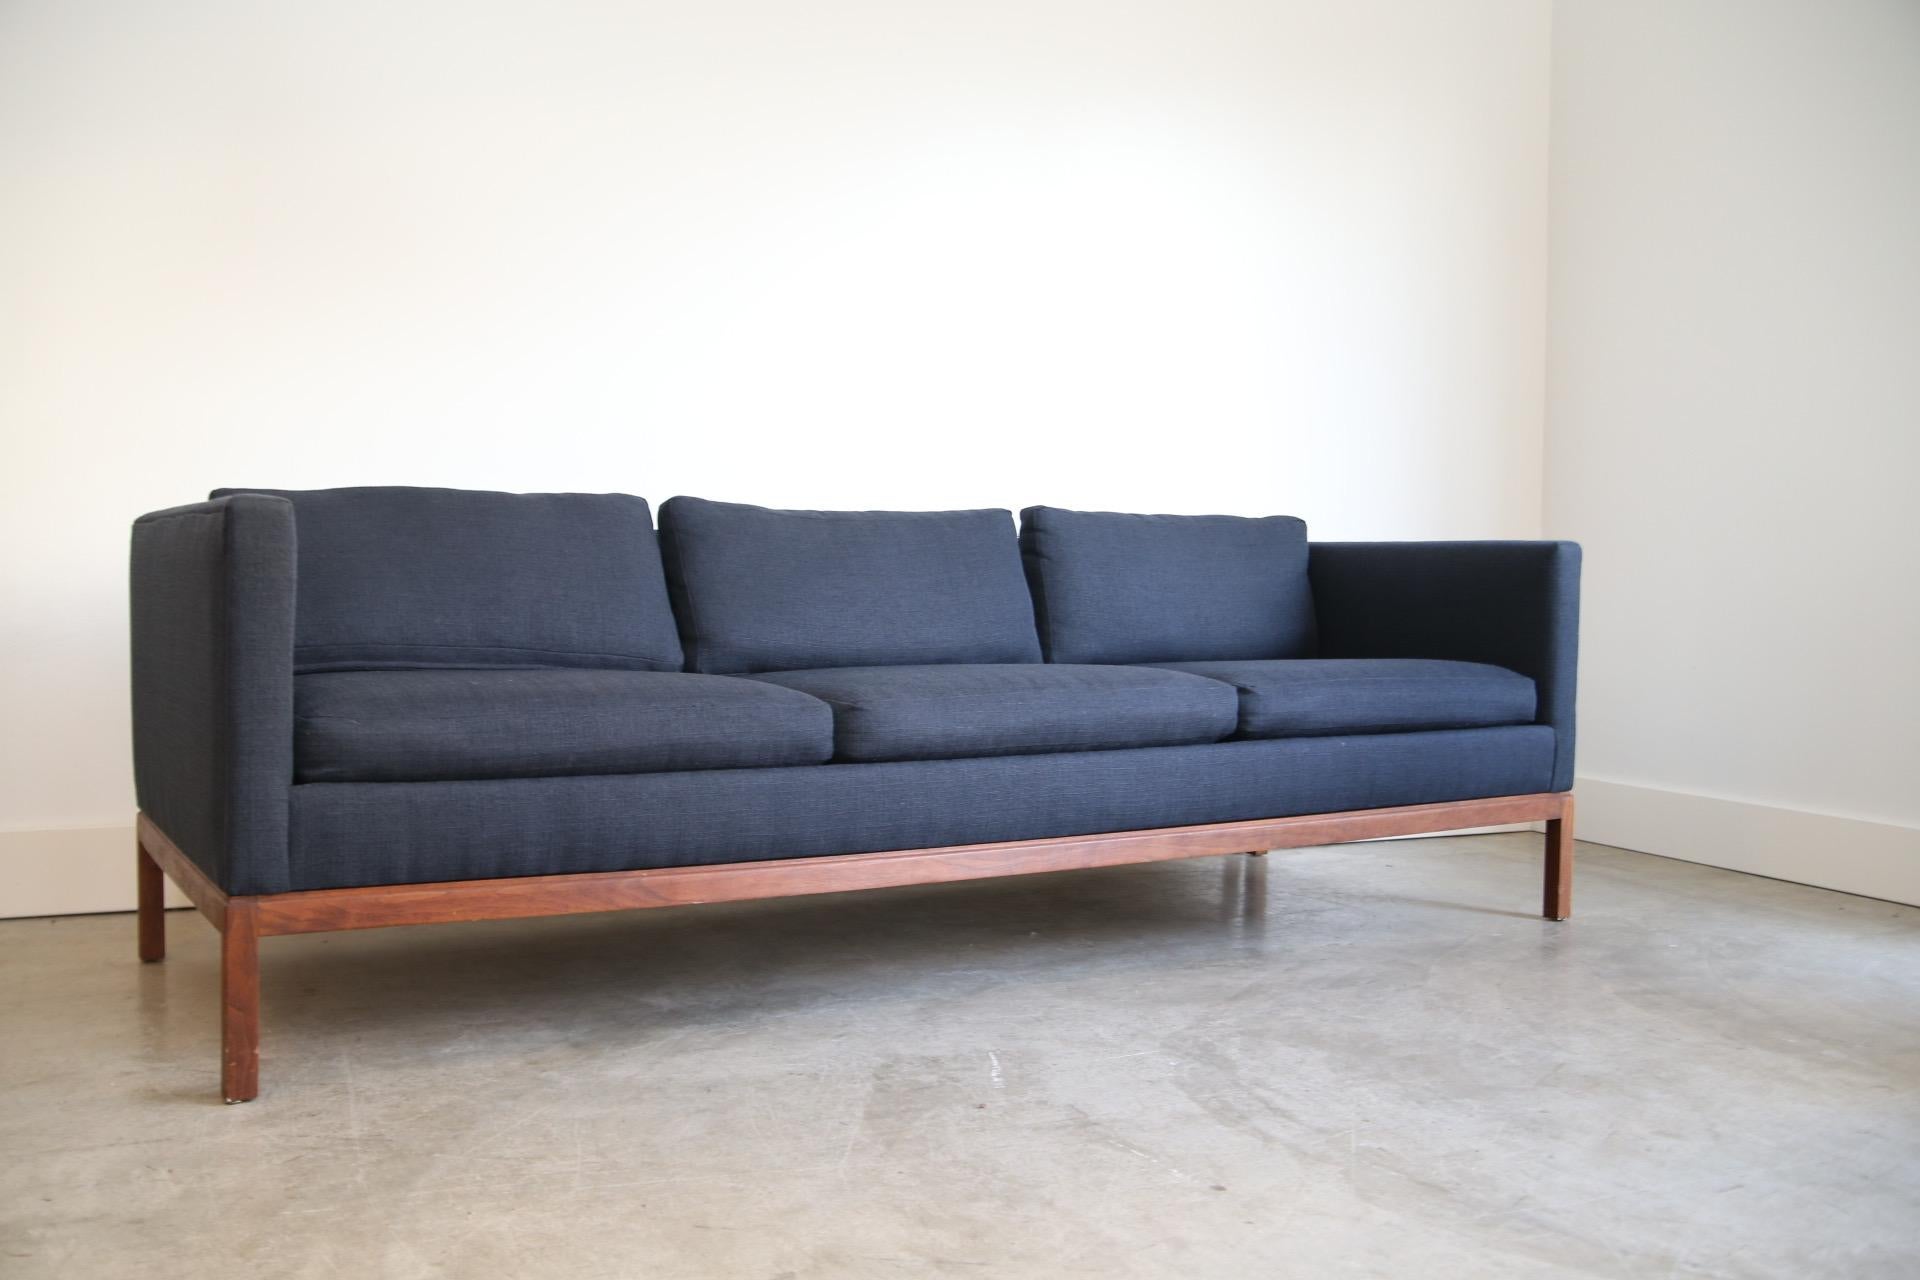 Reupholstered Long and Low Midcentury Sofa In Good Condition For Sale In St. Louis, MO